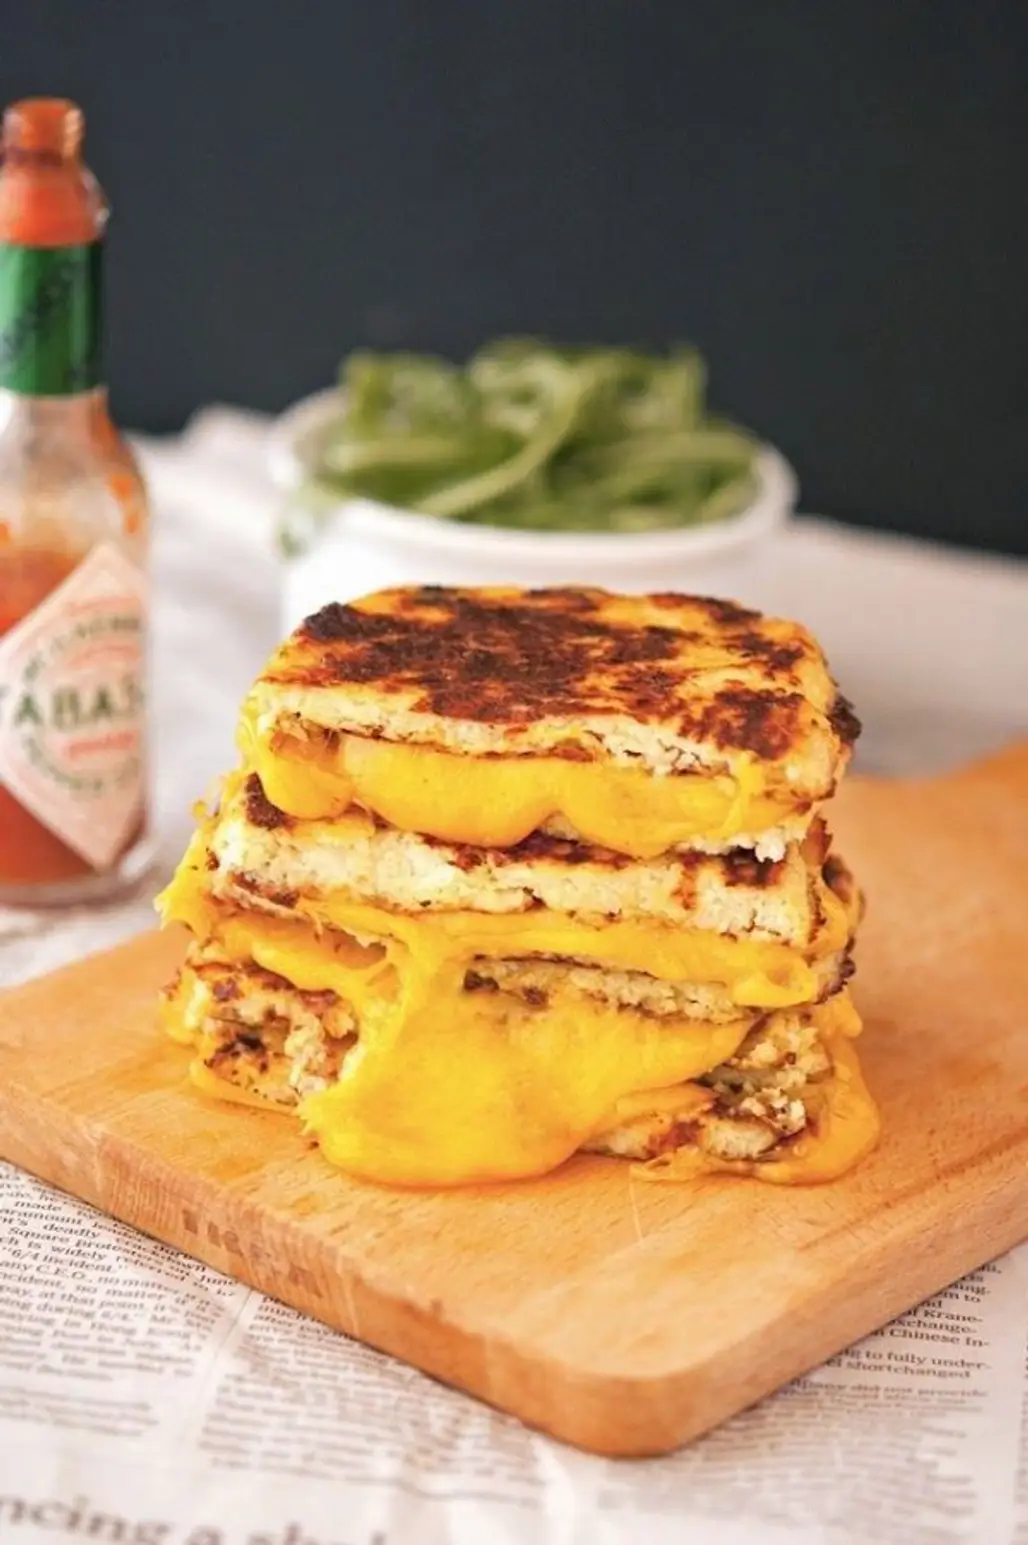 You Have to Try This Cauliflower Crust Grilled Cheese